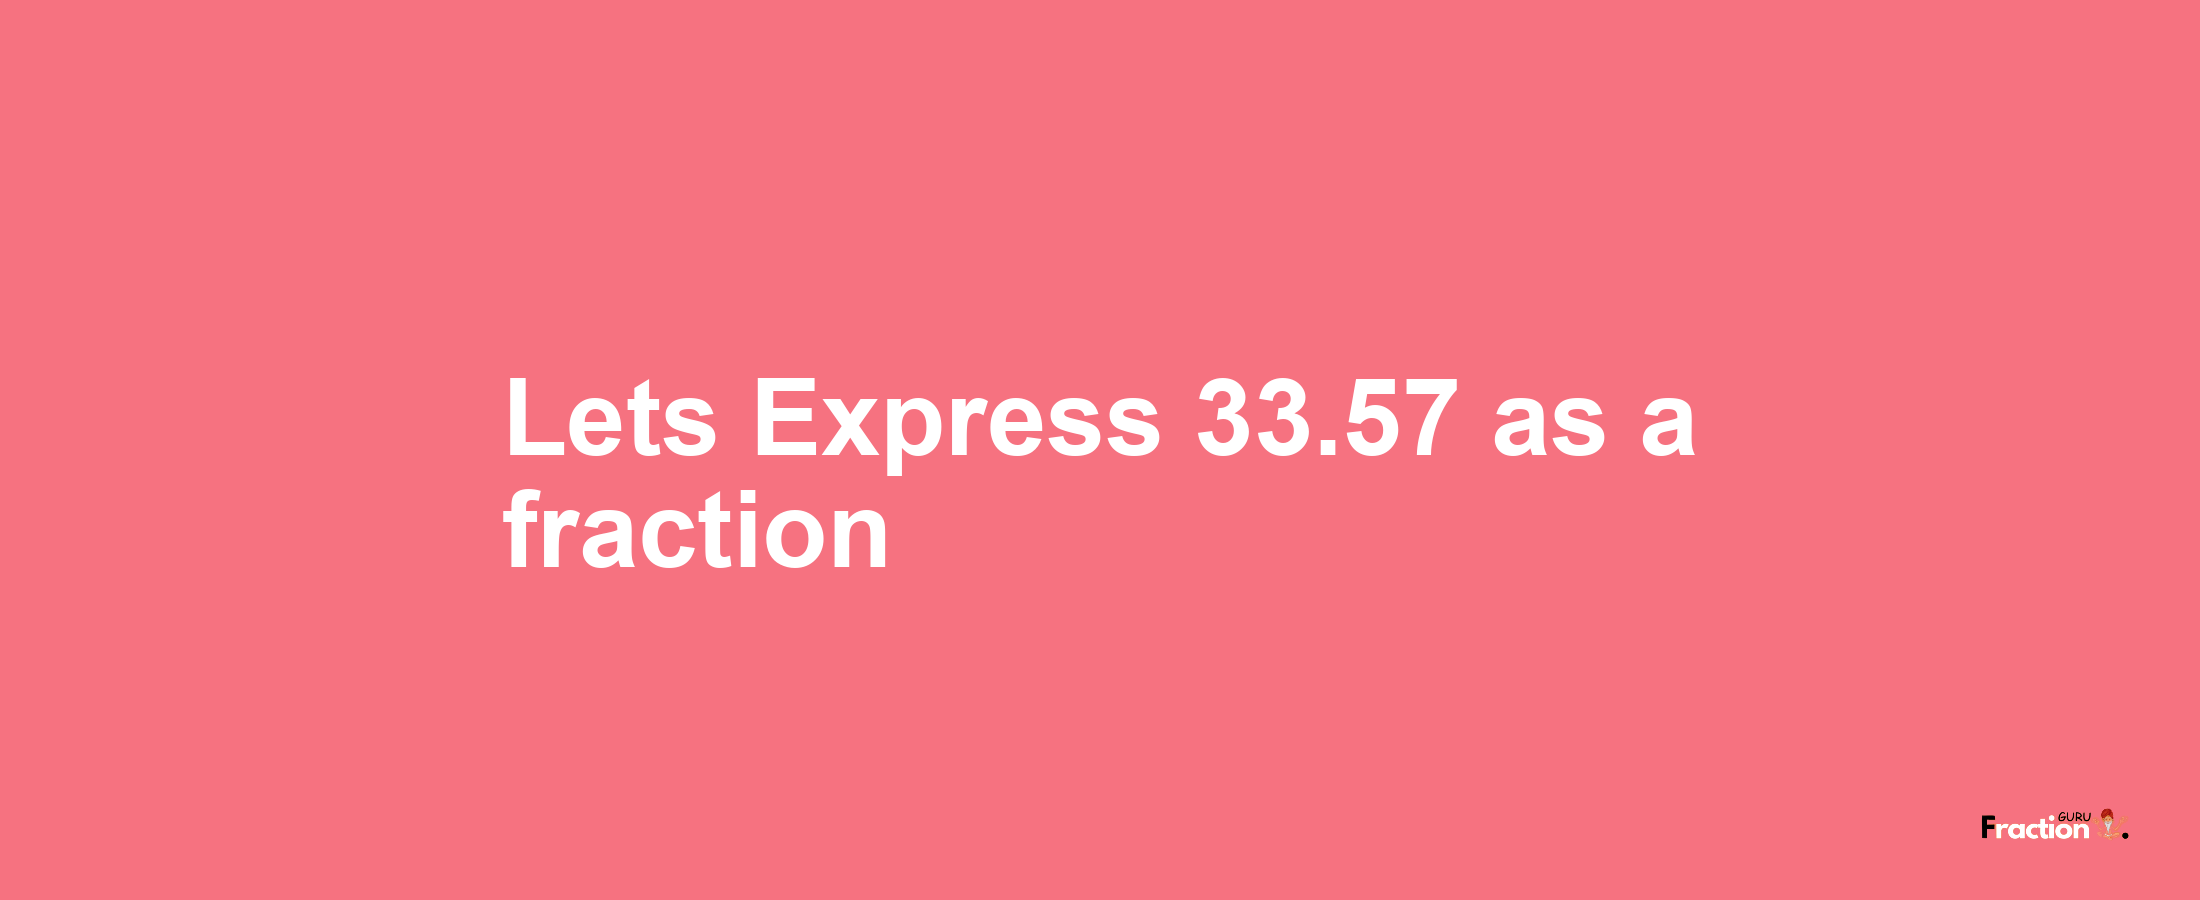 Lets Express 33.57 as afraction